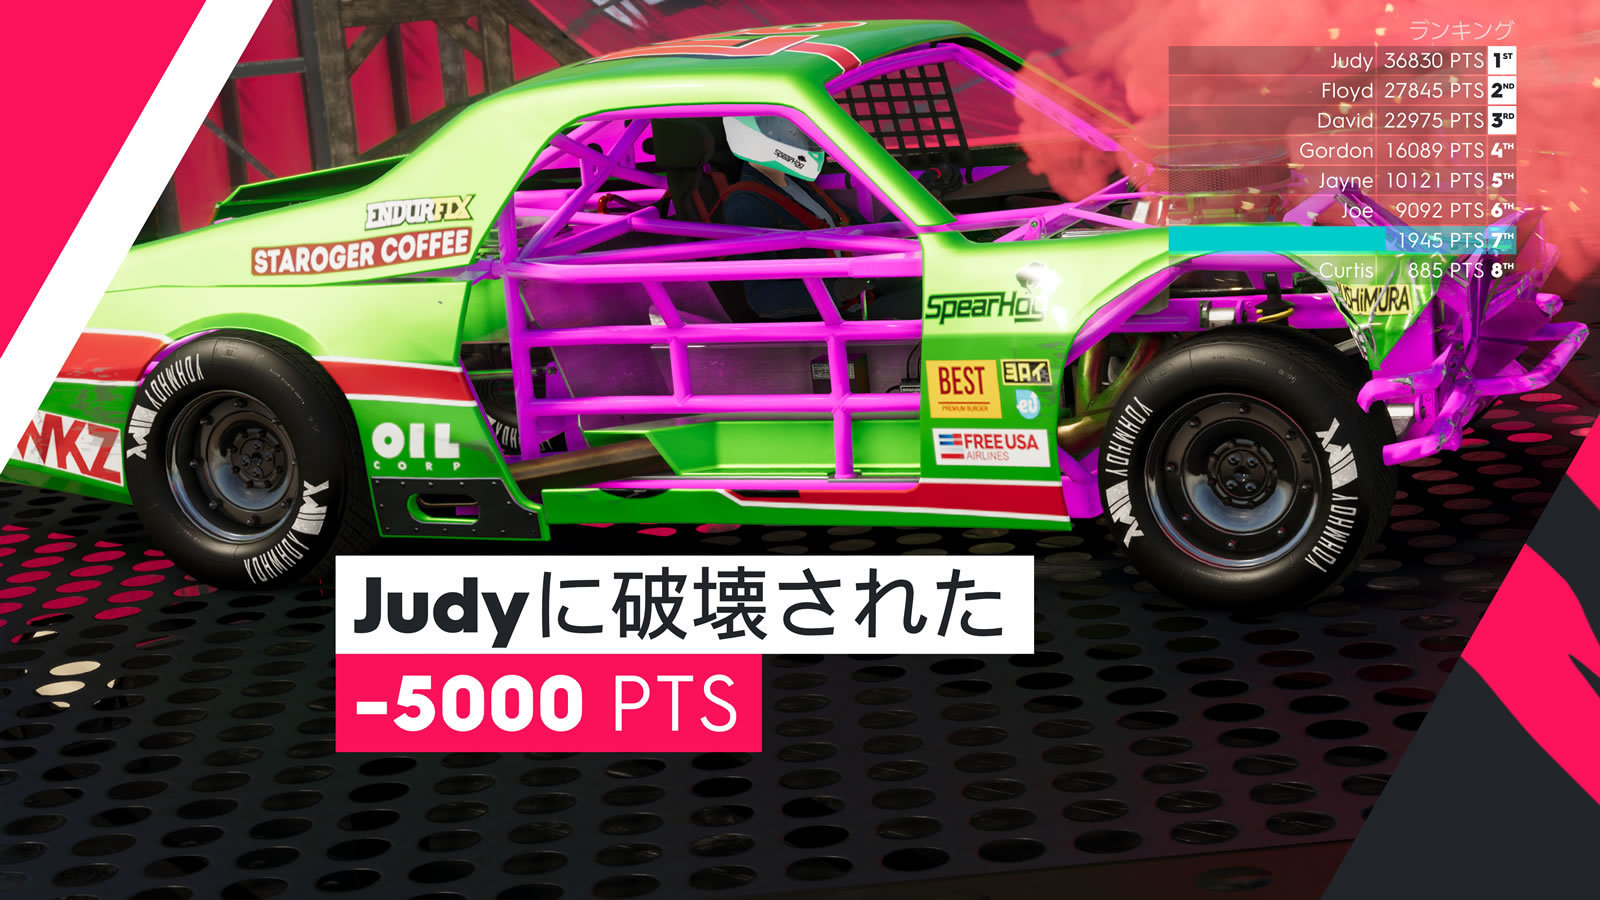 The Crew 2 Demolition Derby And こんなに だったっけ None Soleil